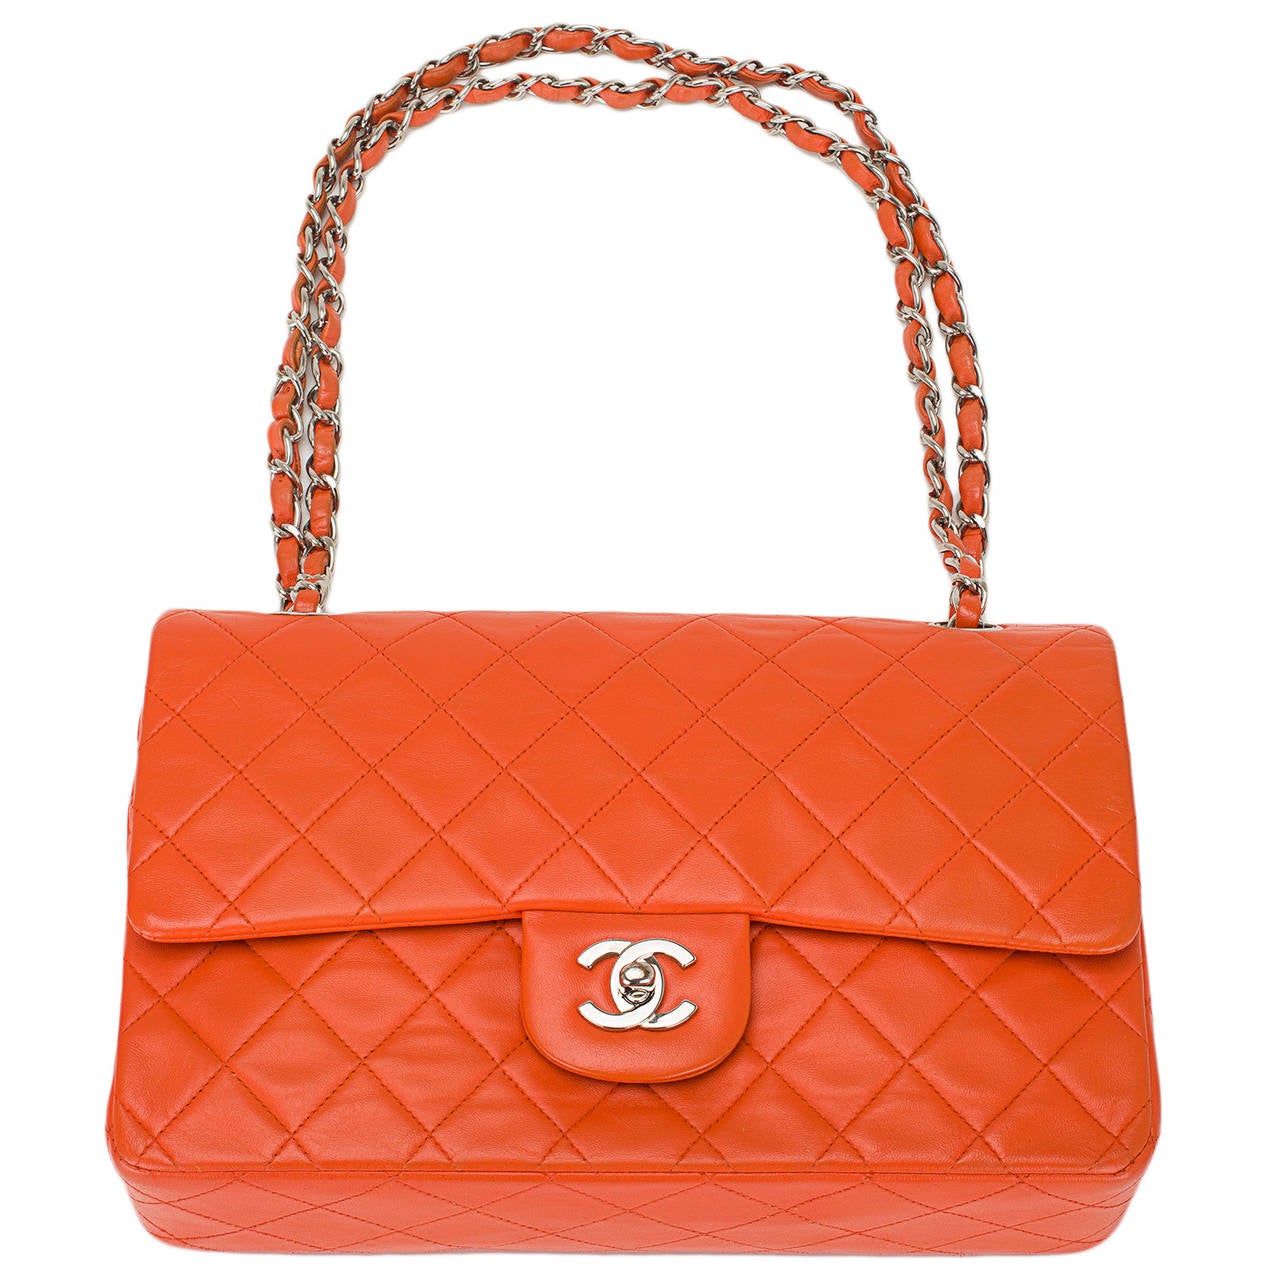 CHANEL Wool Exterior Bags & Handbags for Women, Authenticity Guaranteed